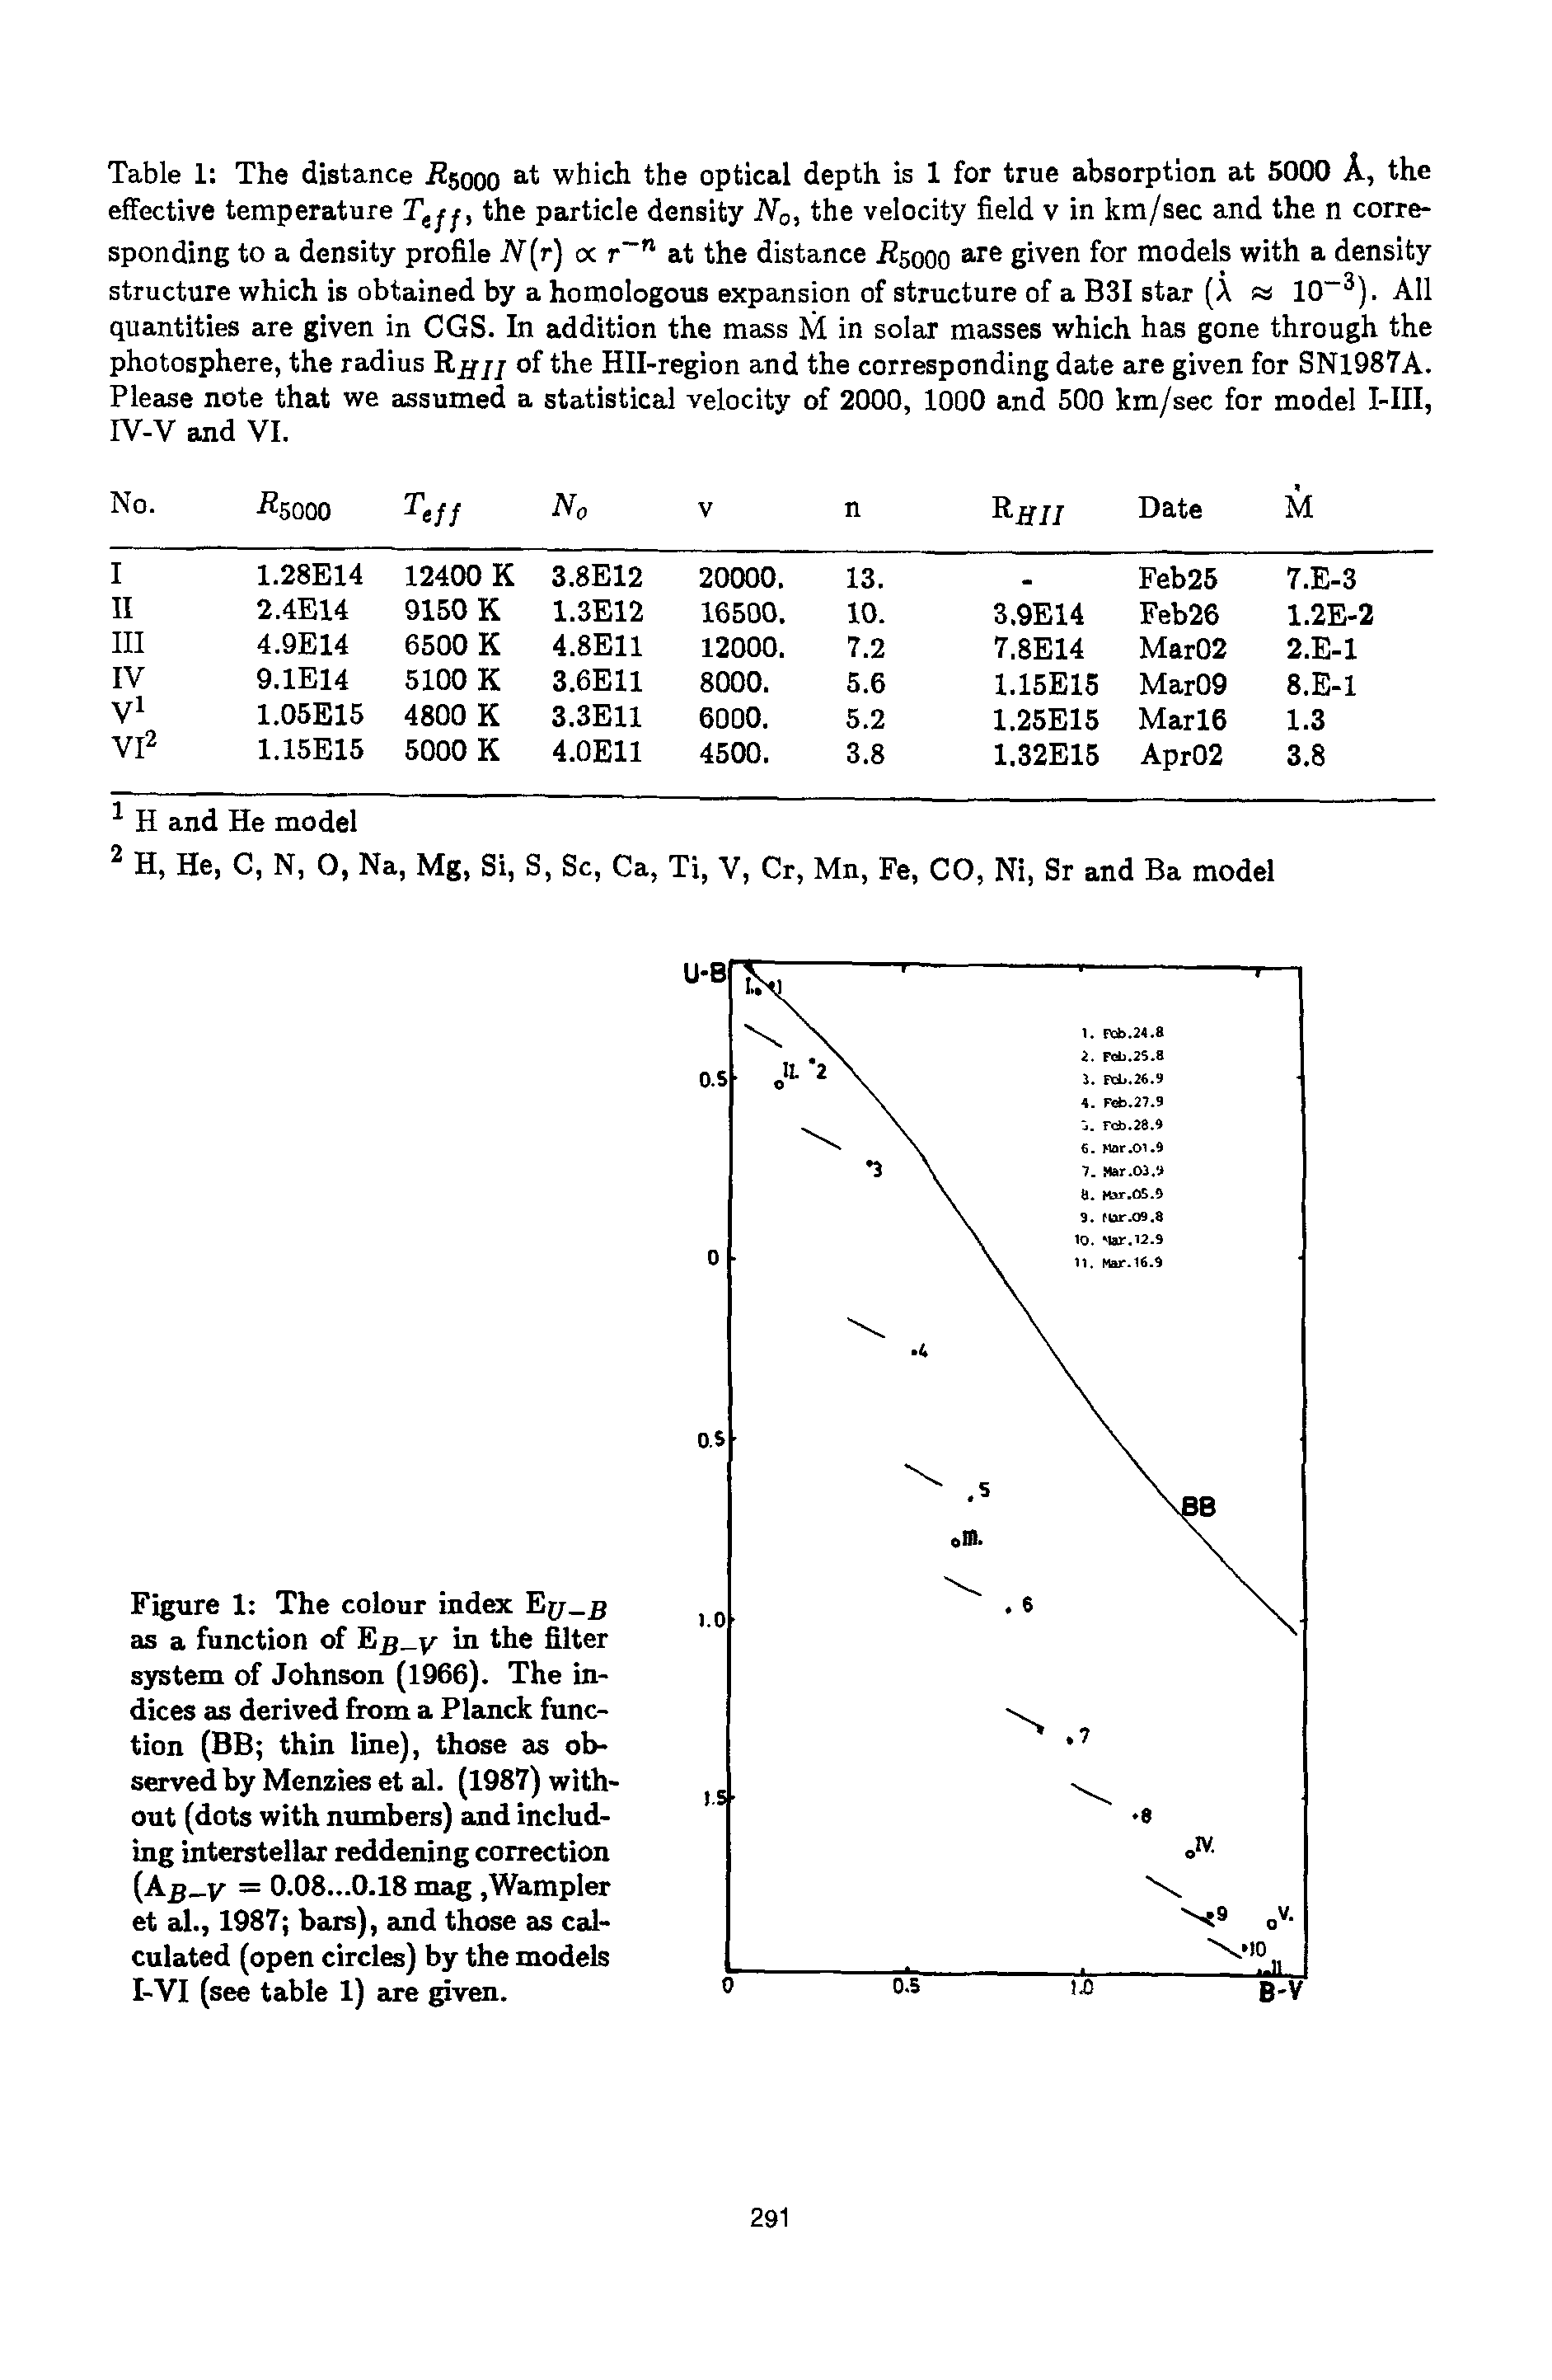 Figure 1 The colour index Exj-b as a function of Ein the filter system of Johnson (1966). The indices as derived from a Planck function (BB thin line), those as observed by Menzieset al. (1987) without (dots with numbers) and including interstellar reddening correction (A y = 0.08...0.18 mag. Wampler et al., 1987 bars), and those as calculated (open circles) by the models I-VI (see table 1) are given.